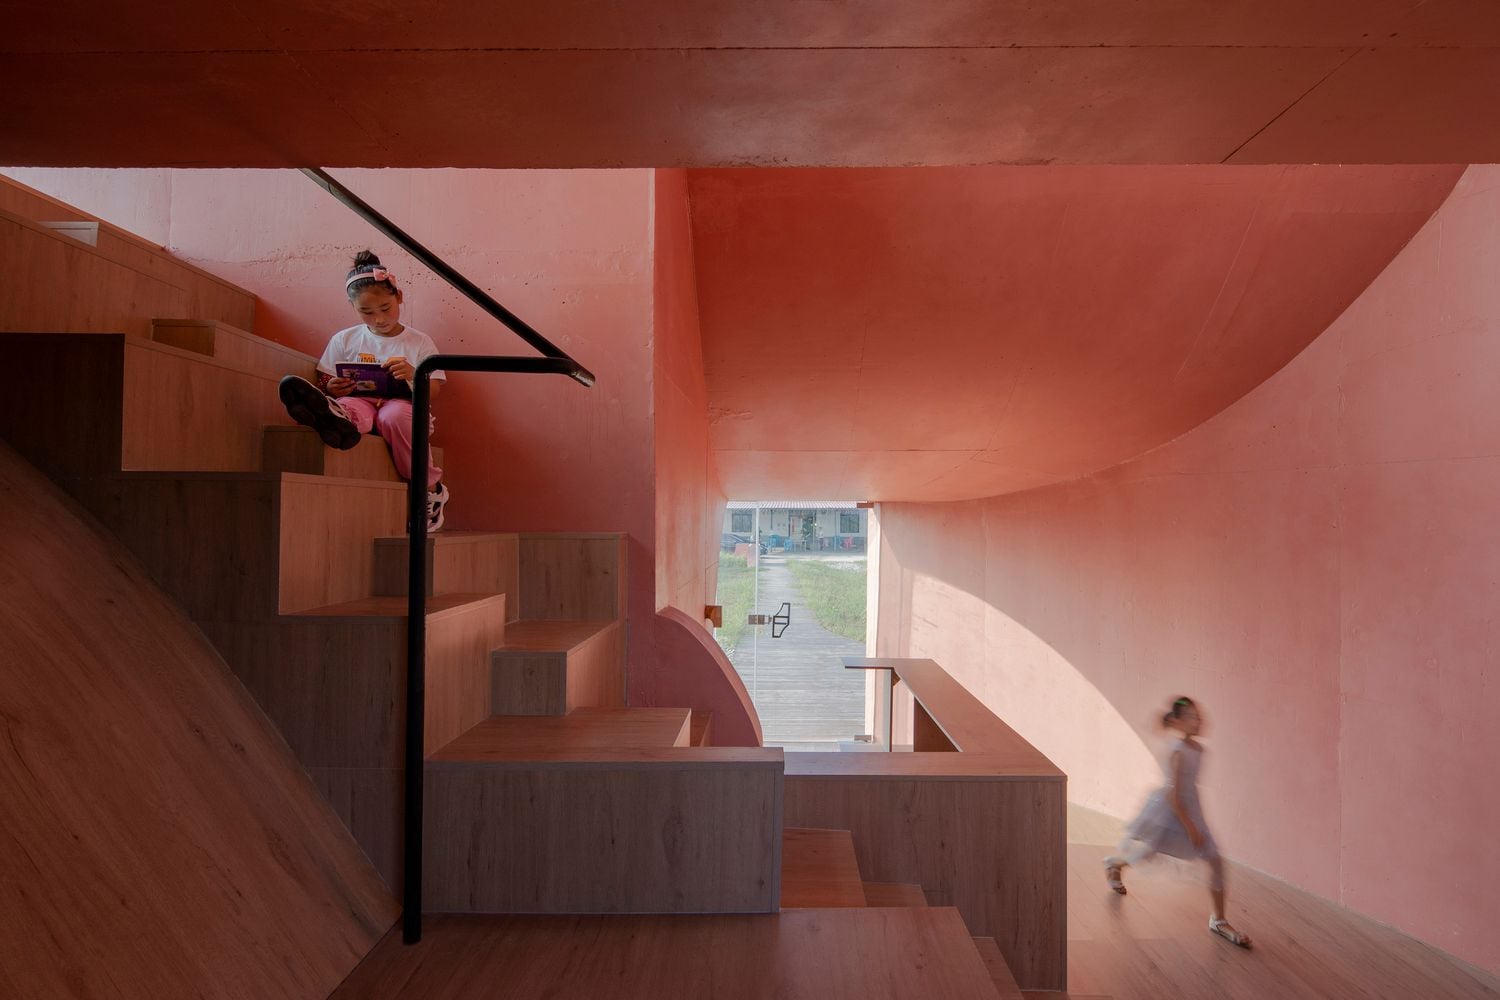 The rosy-colored, simple yet classy interiors of the Atelier XI-designed 